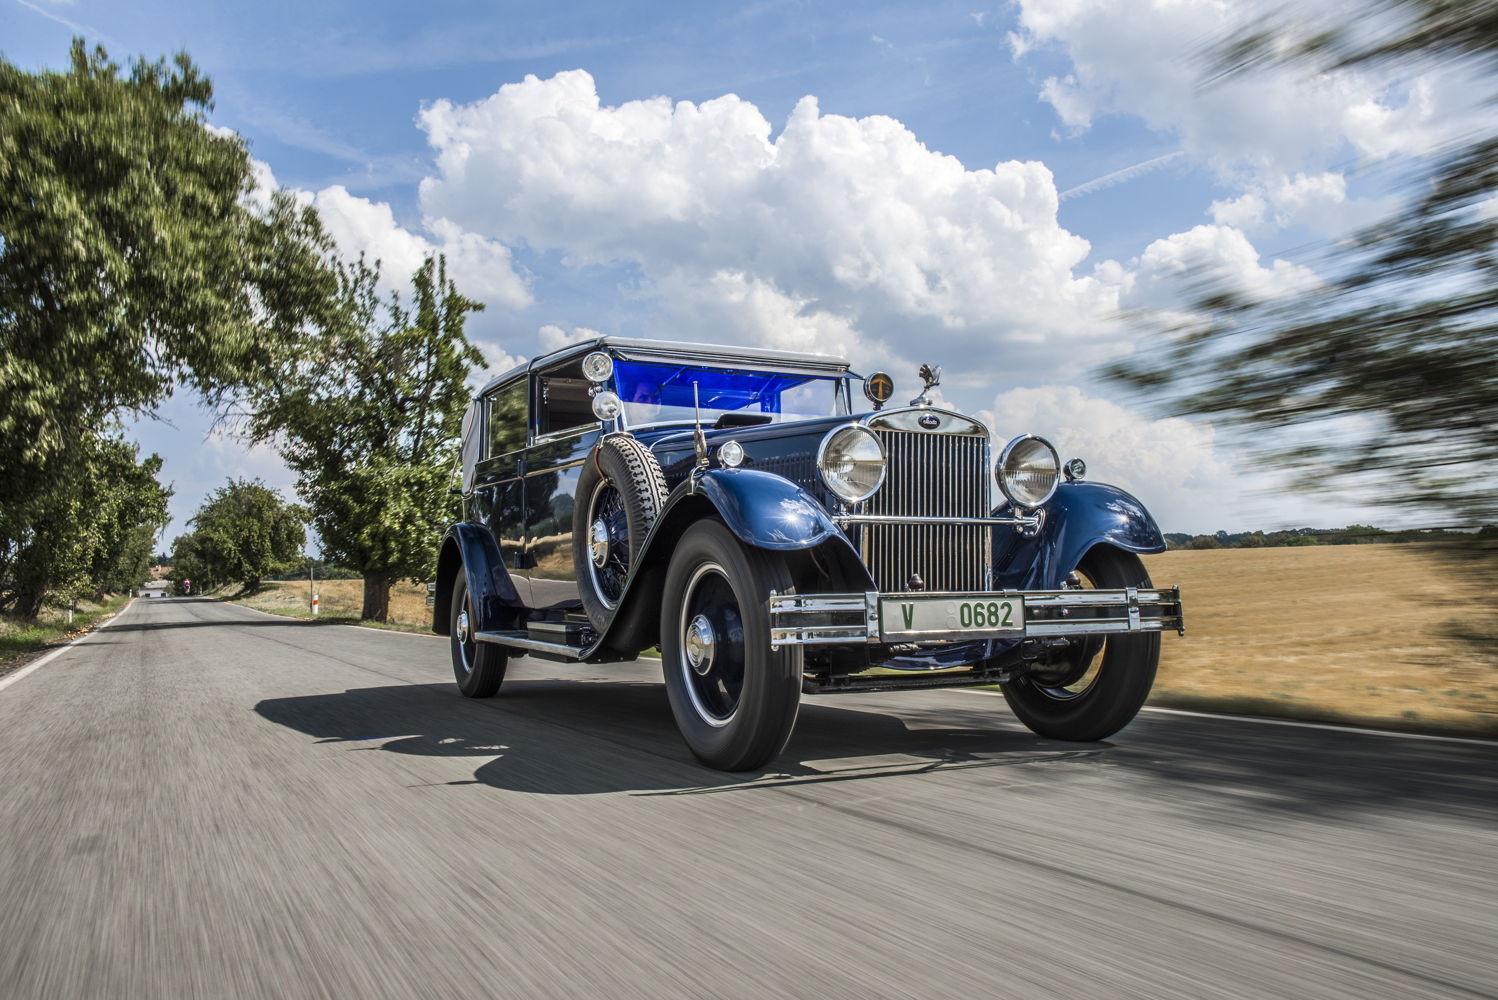 Upon the completion of a two-year restoration project, the
car manufacturer presents a ŠKODA 860 convertible as
part of the permanent exhibition at the ŠKODA Museum in
Mladá Boleslav. The valuable 1932 exhibit features a 3.9-
litre in-line engine with a 44 kW (60 hp) output. The
maximum speed of the 5.5-meter-long vehicle is 110 km/h.